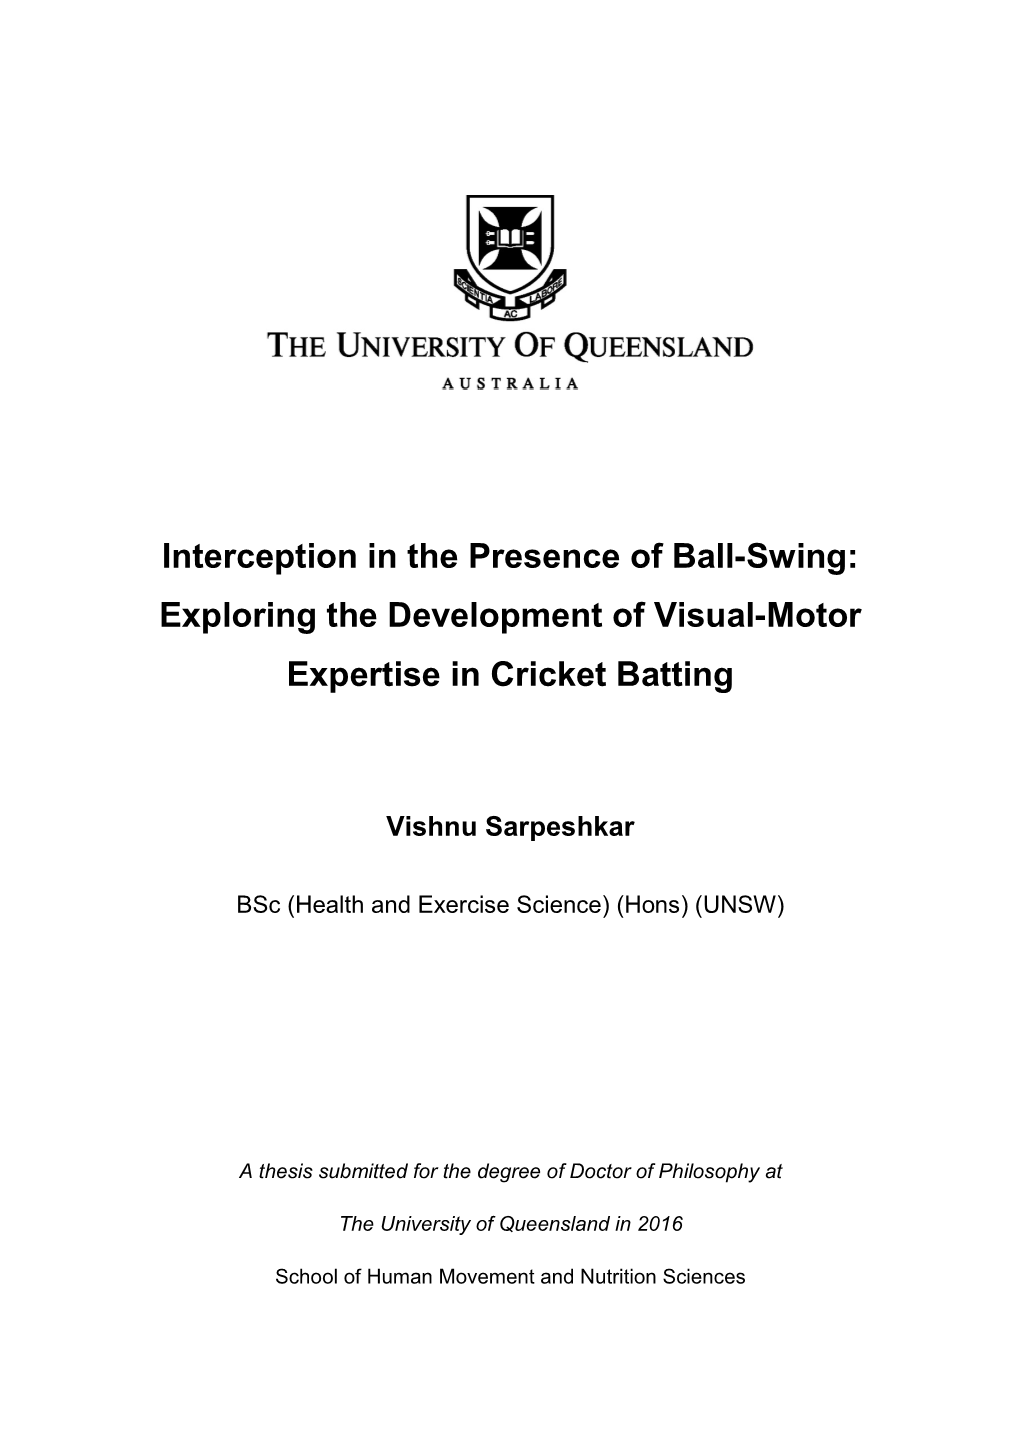 Interception in the Presence of Ball-Swing: Exploring the Development of Visual-Motor